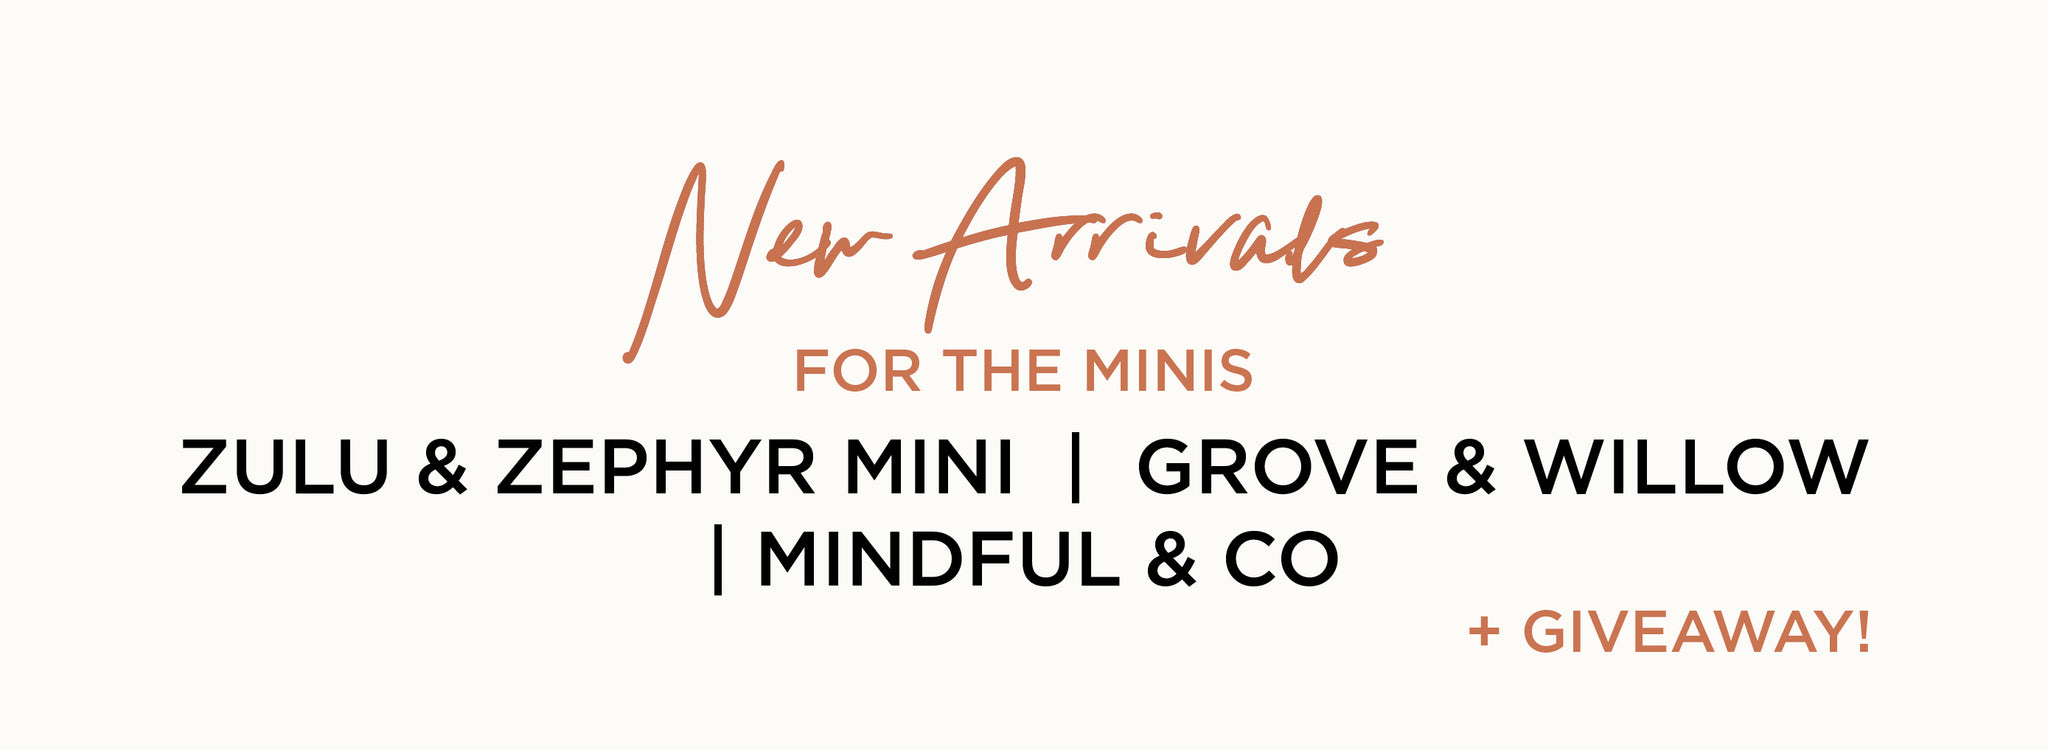 NEW ARRIVALS - FOR THE MINIS